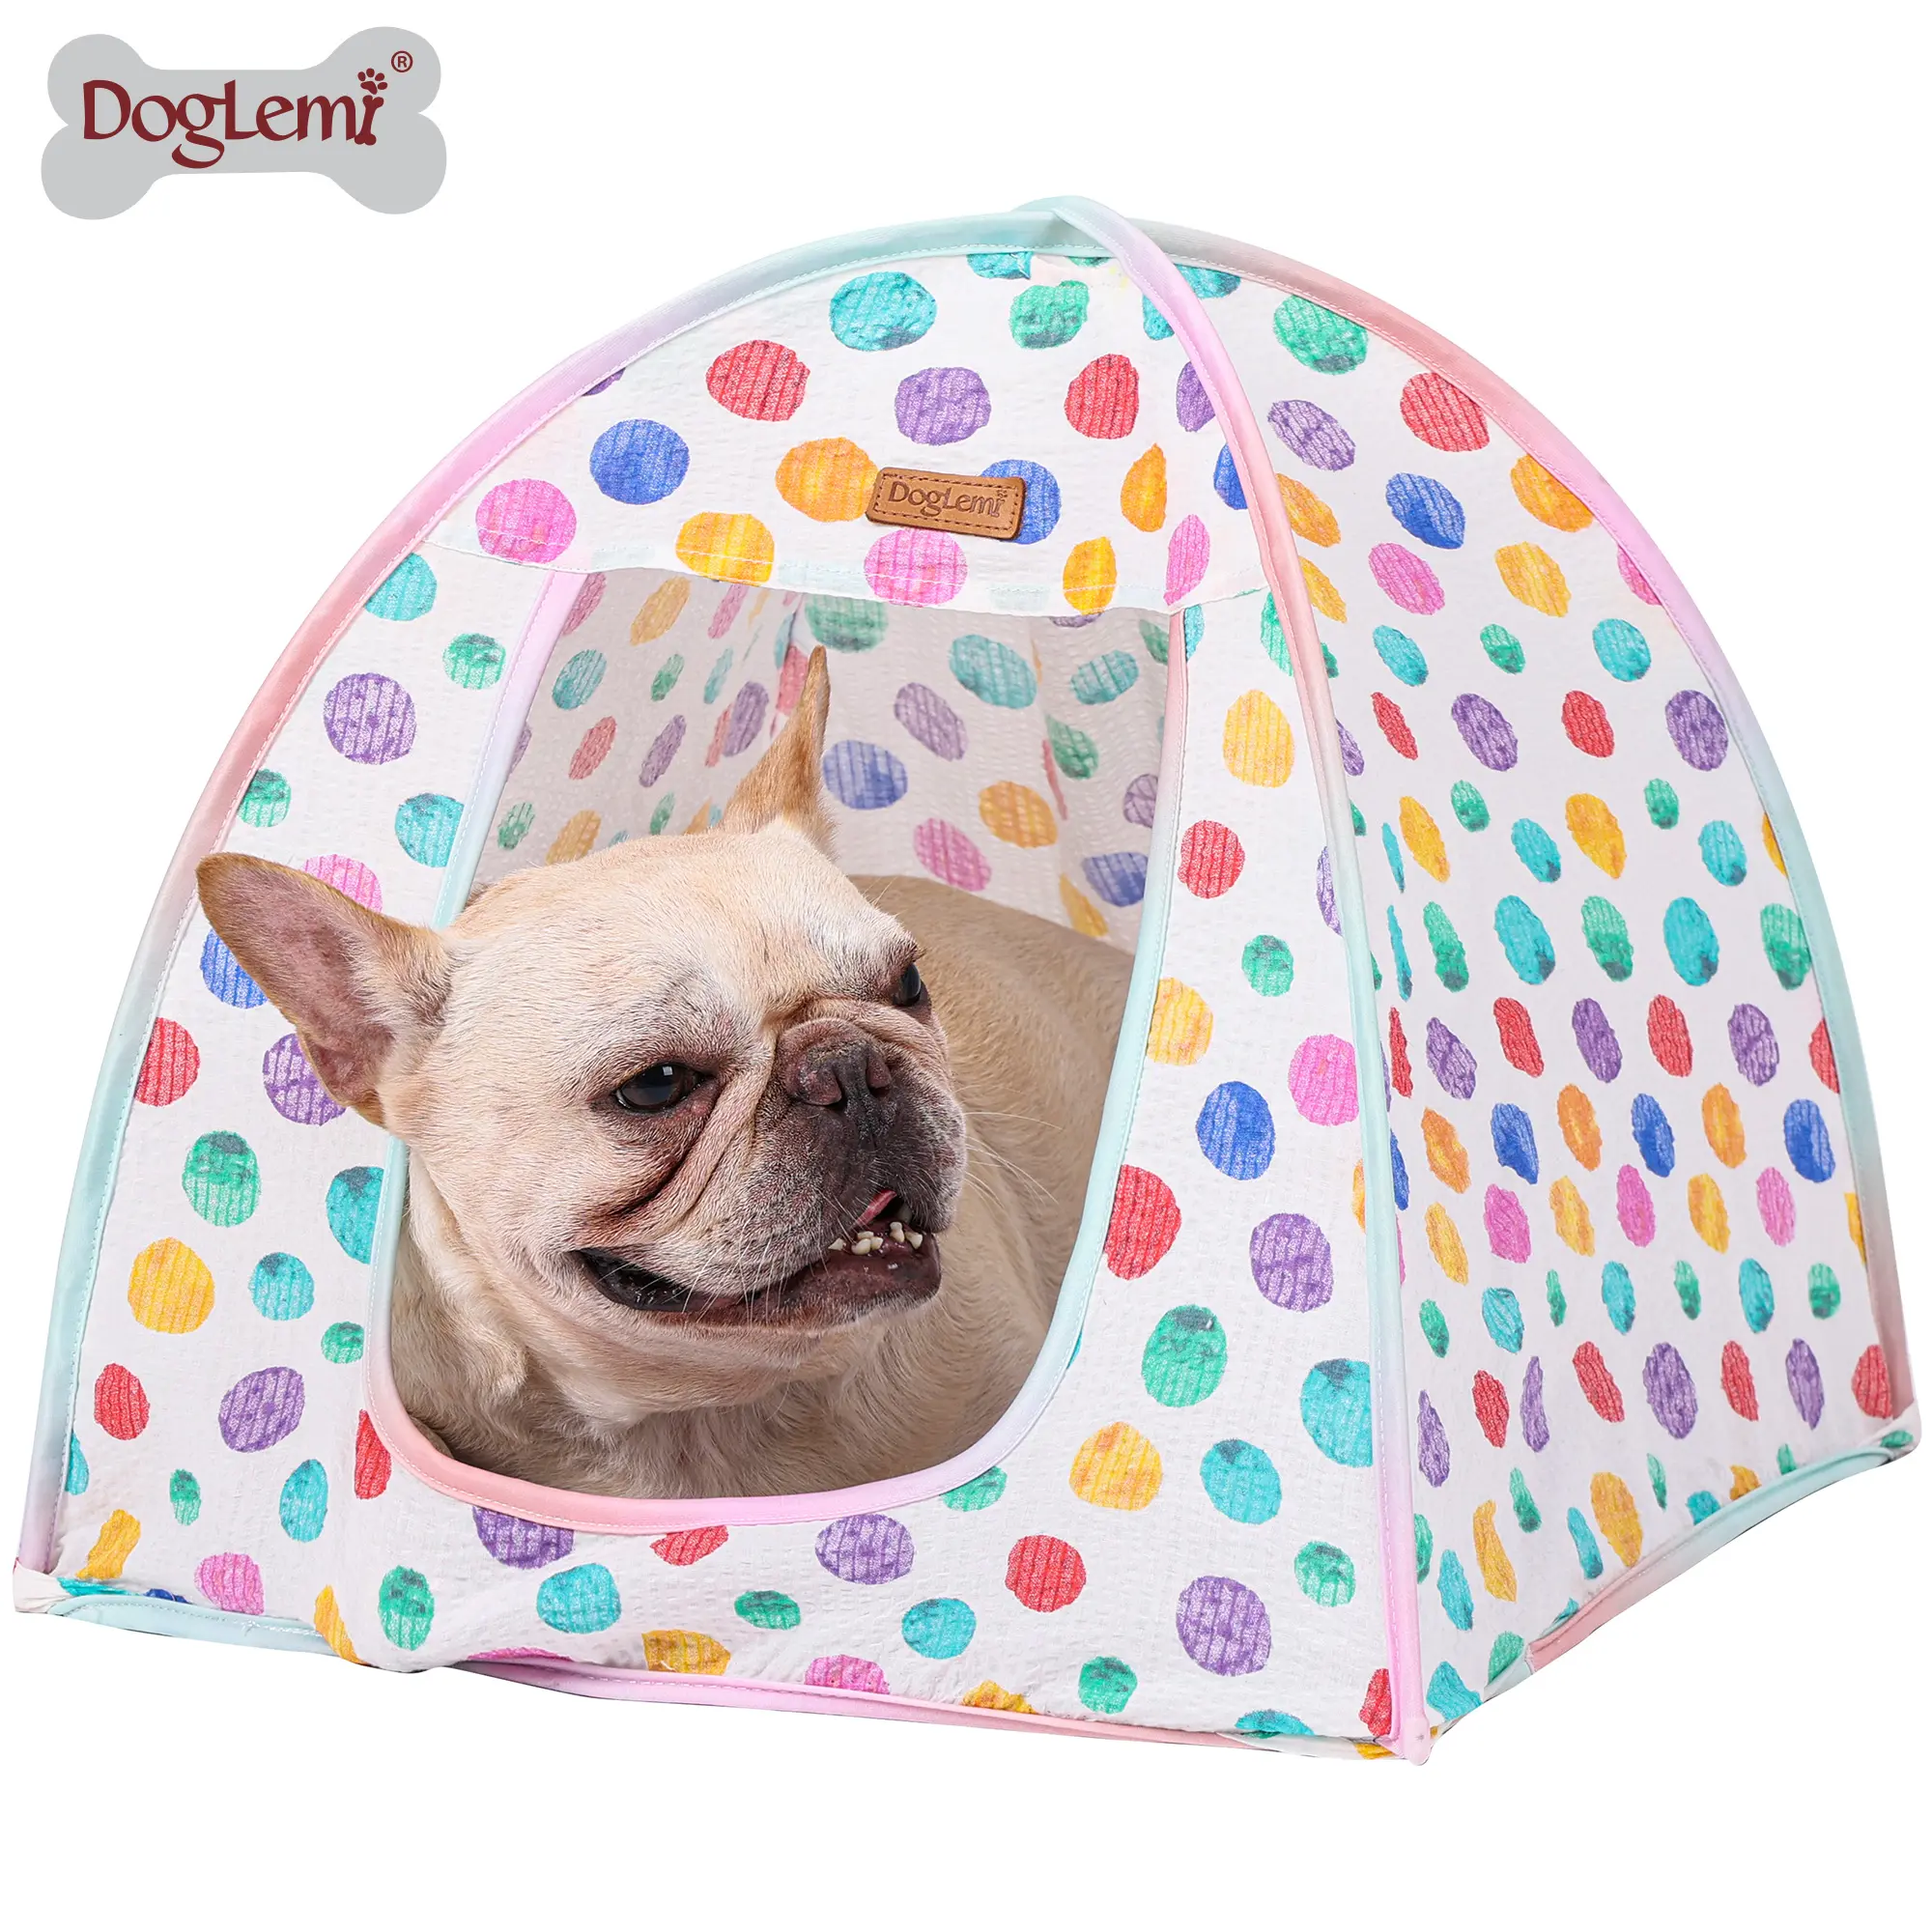 Anti-slip wear-resistant stable folding cool pet tent ,Color dot dog cat tent camping outdoors